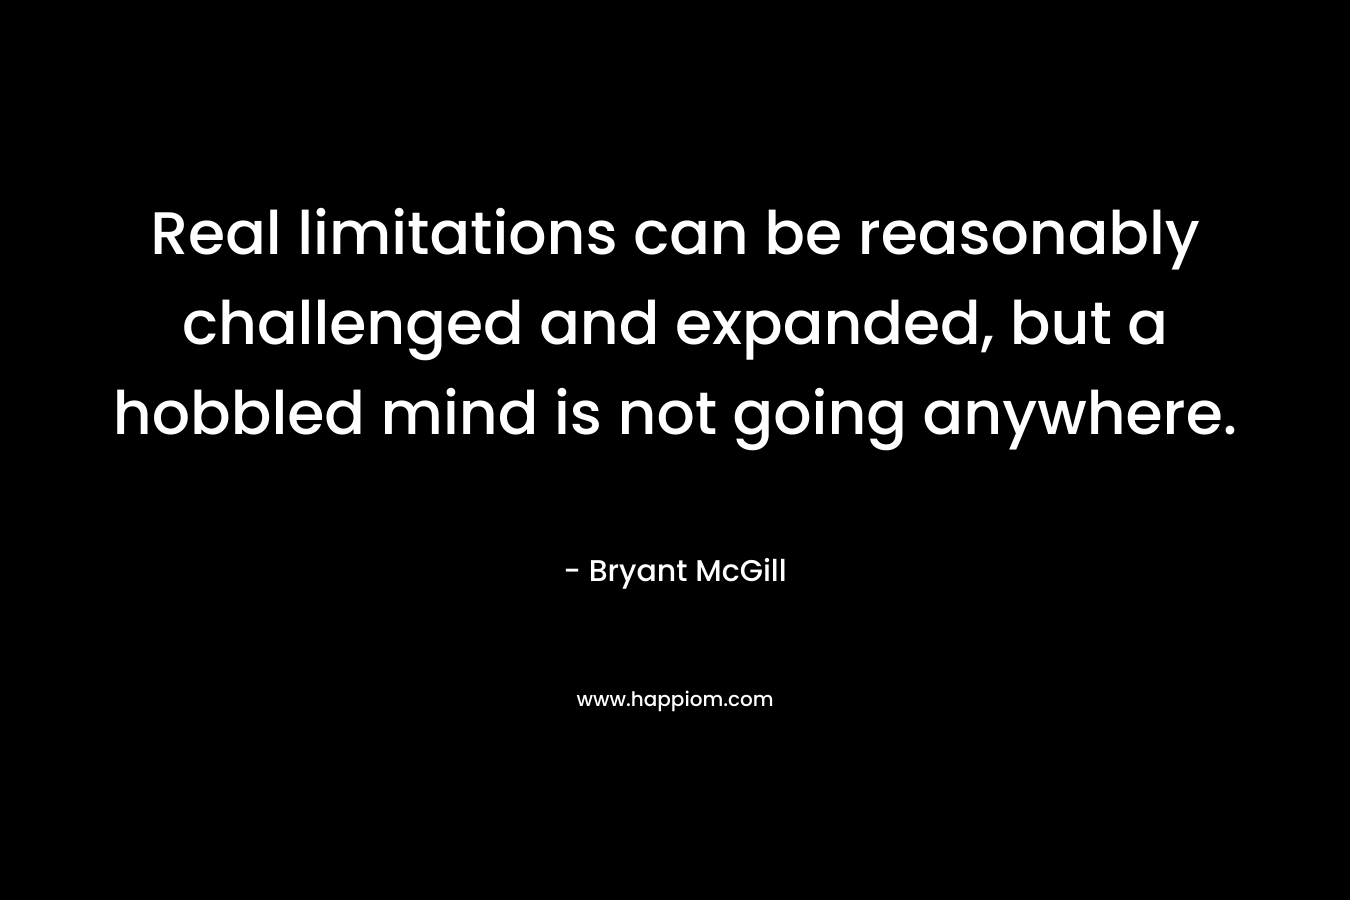 Real limitations can be reasonably challenged and expanded, but a hobbled mind is not going anywhere.